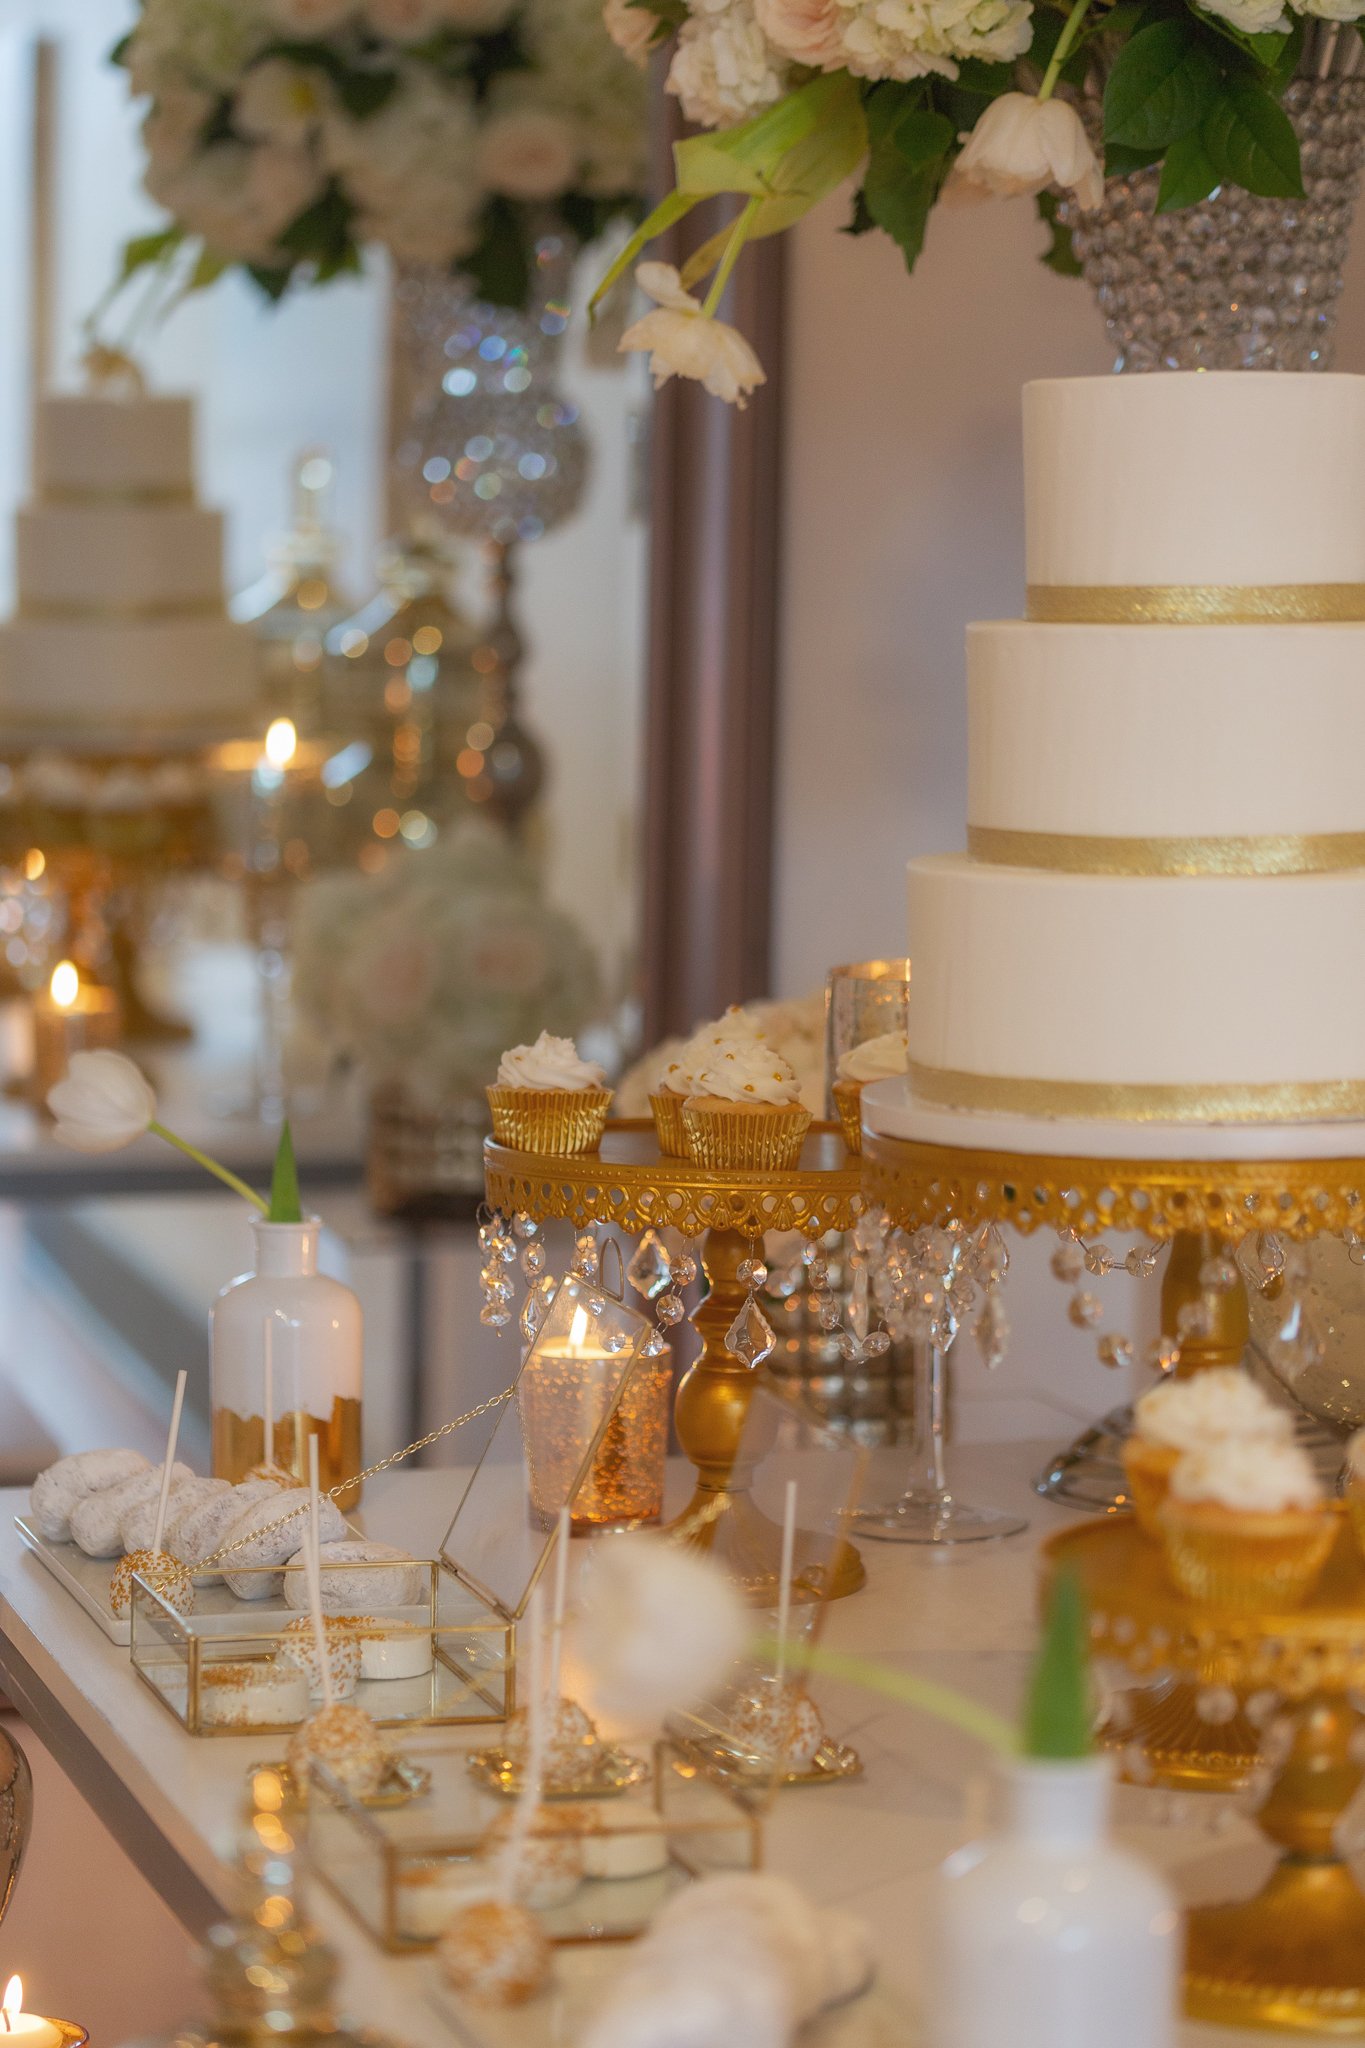 finesse events - cream and gold theme - table - cake and desserts.jpg